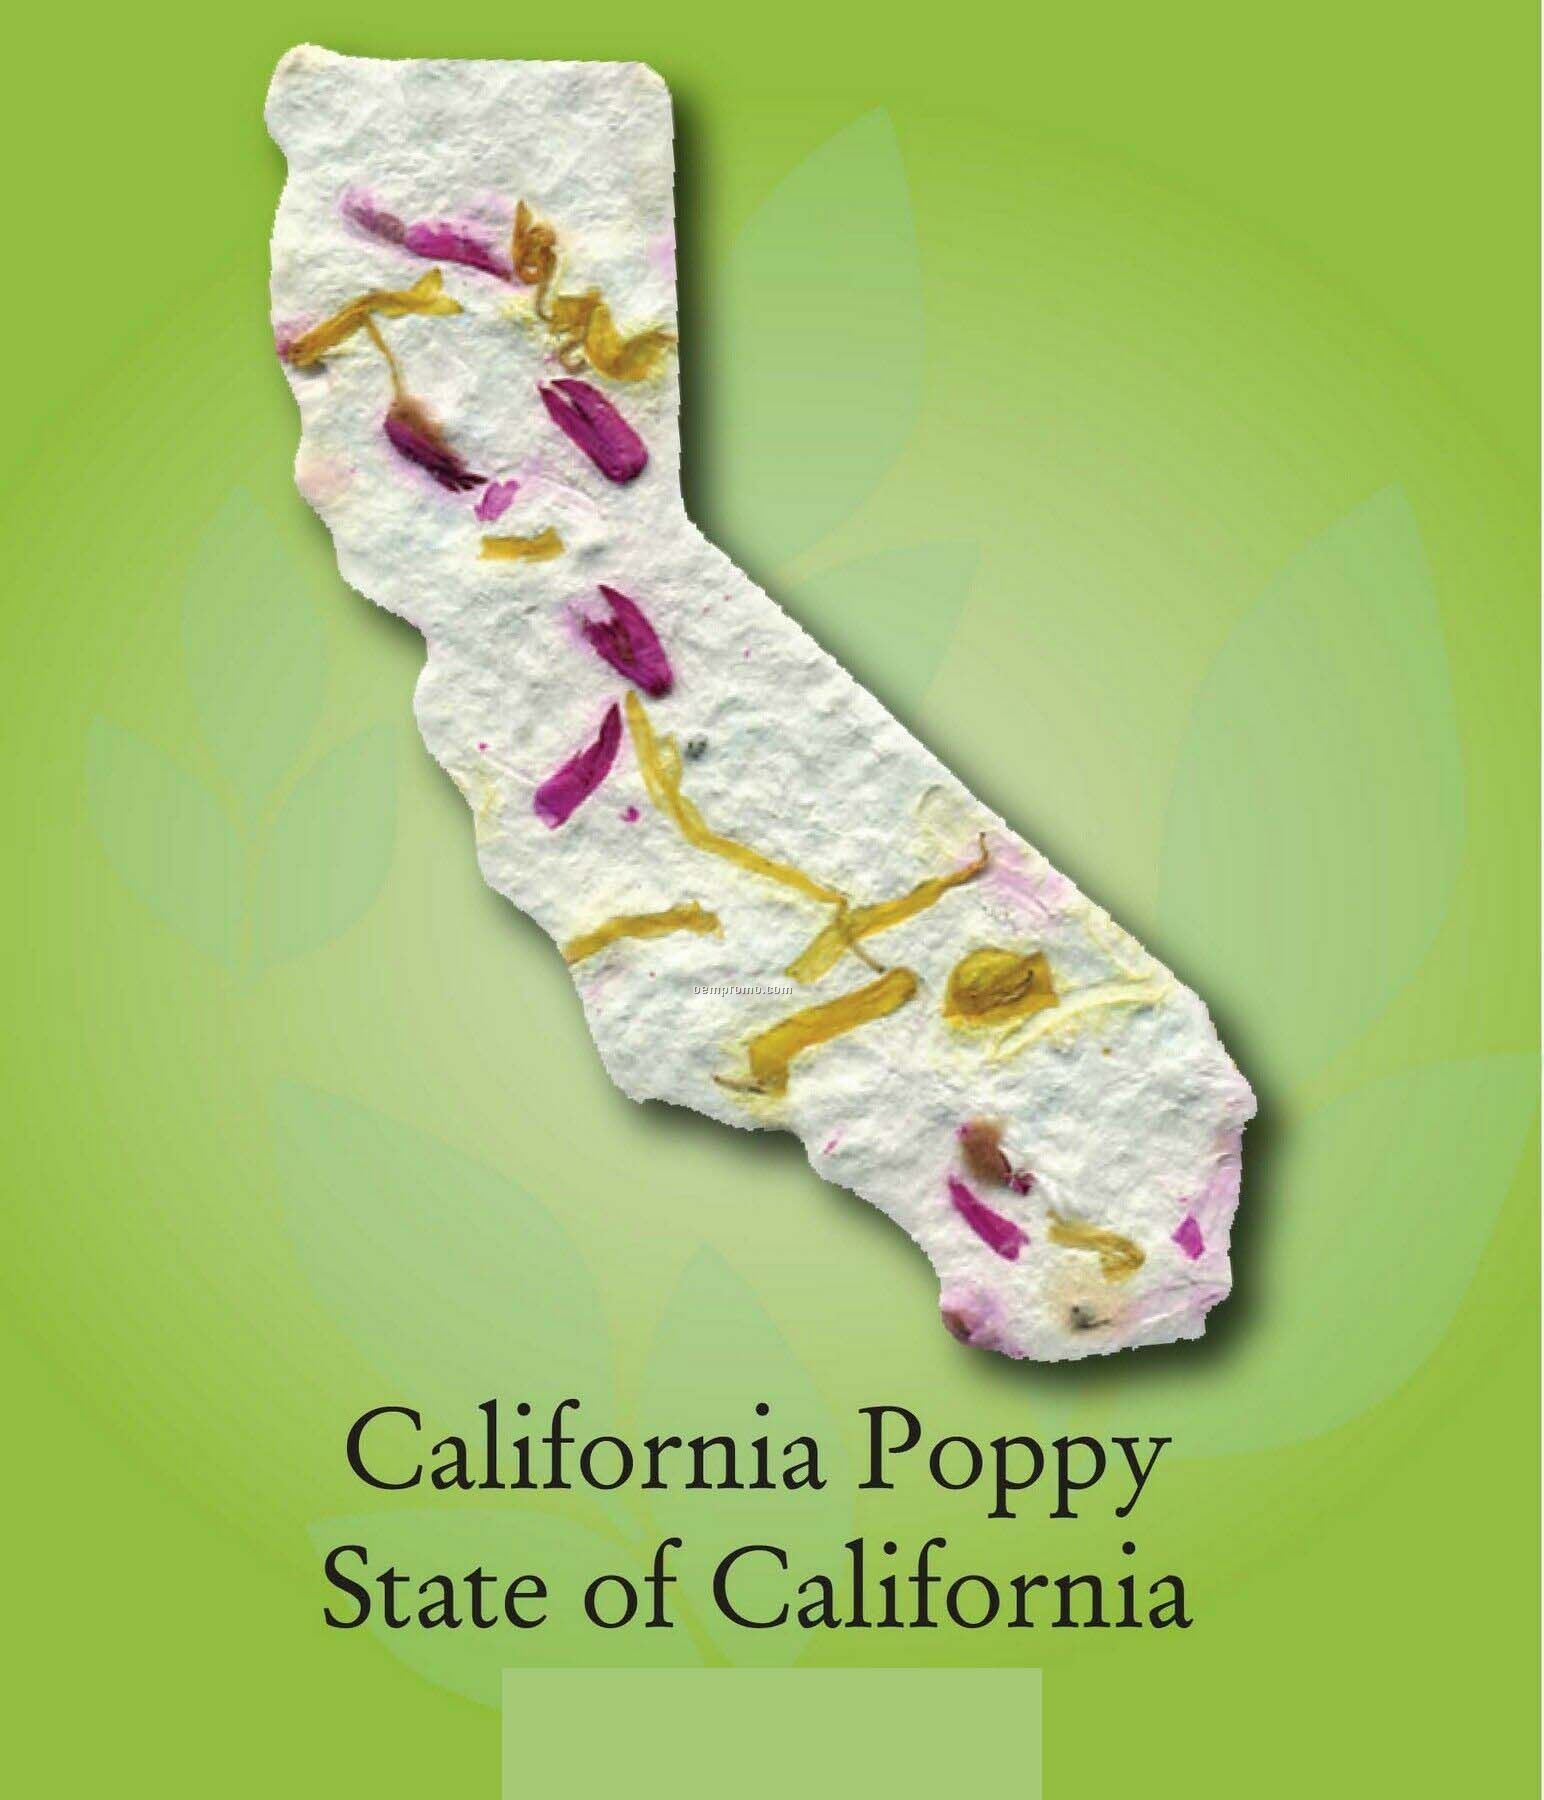 California Poppy State Of California Ornament With Embedded Seed